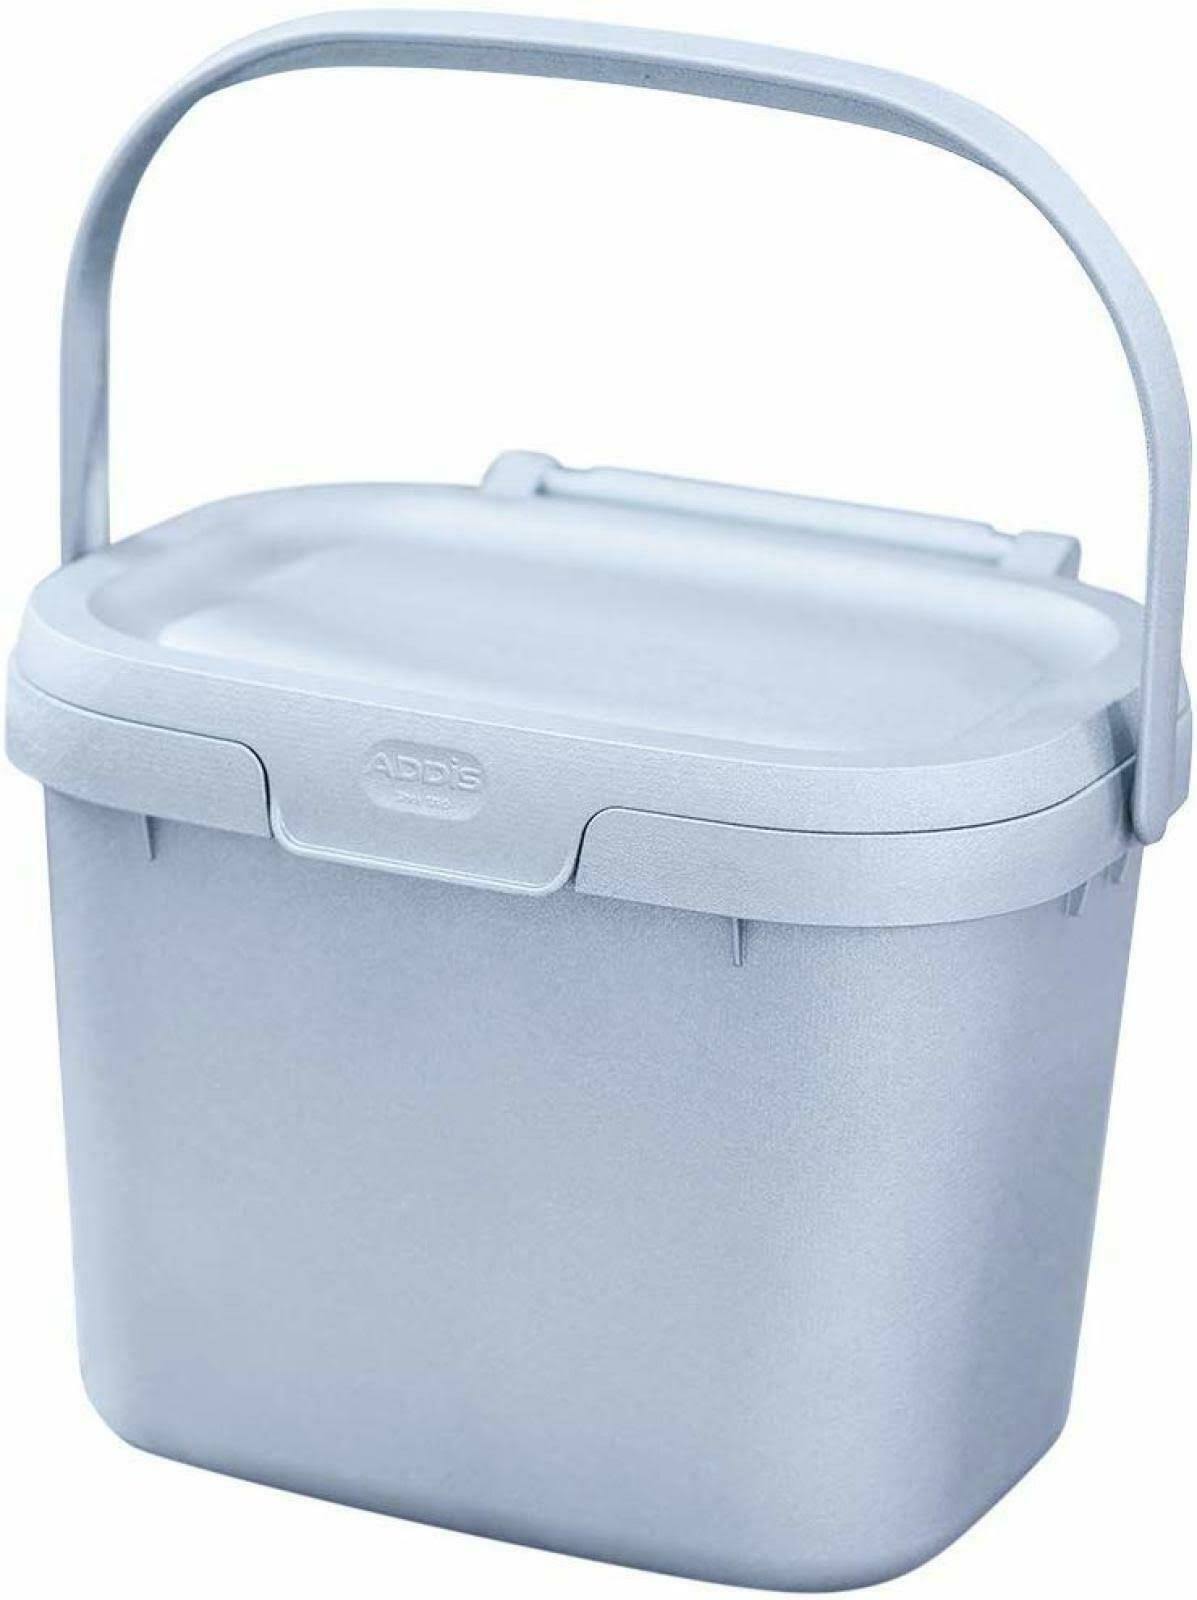 Addis Eco 100% Plastic Everyday Kitchen Food Waste Compost Caddy Bin, 4.5 Litre, Recycled Light Grey